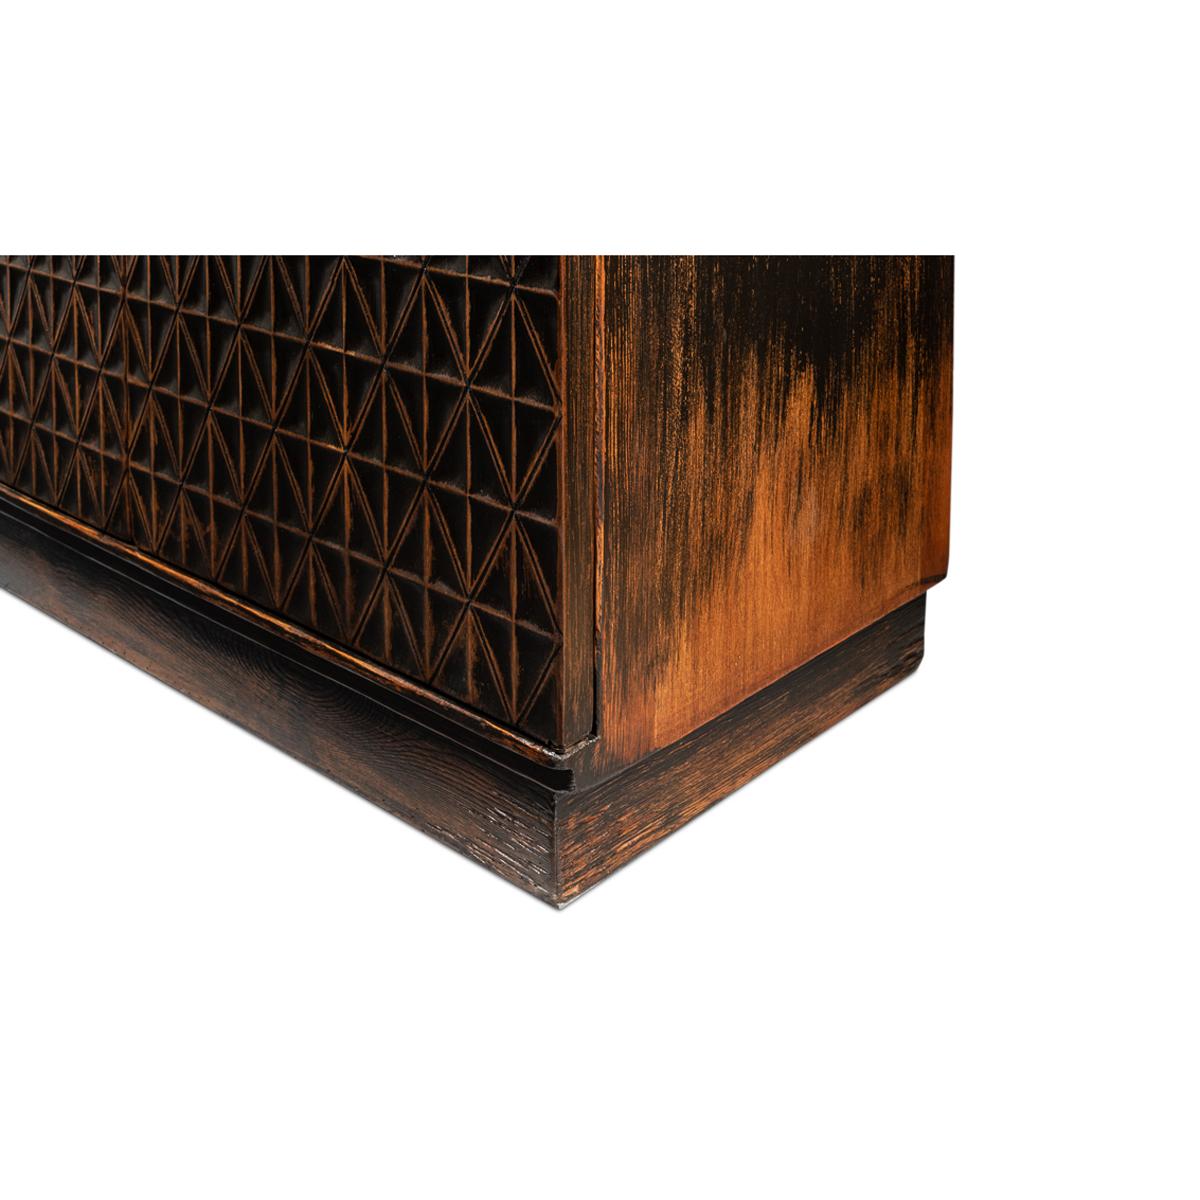 Geometric Appeal Rustic Pine Credenza For Sale 3